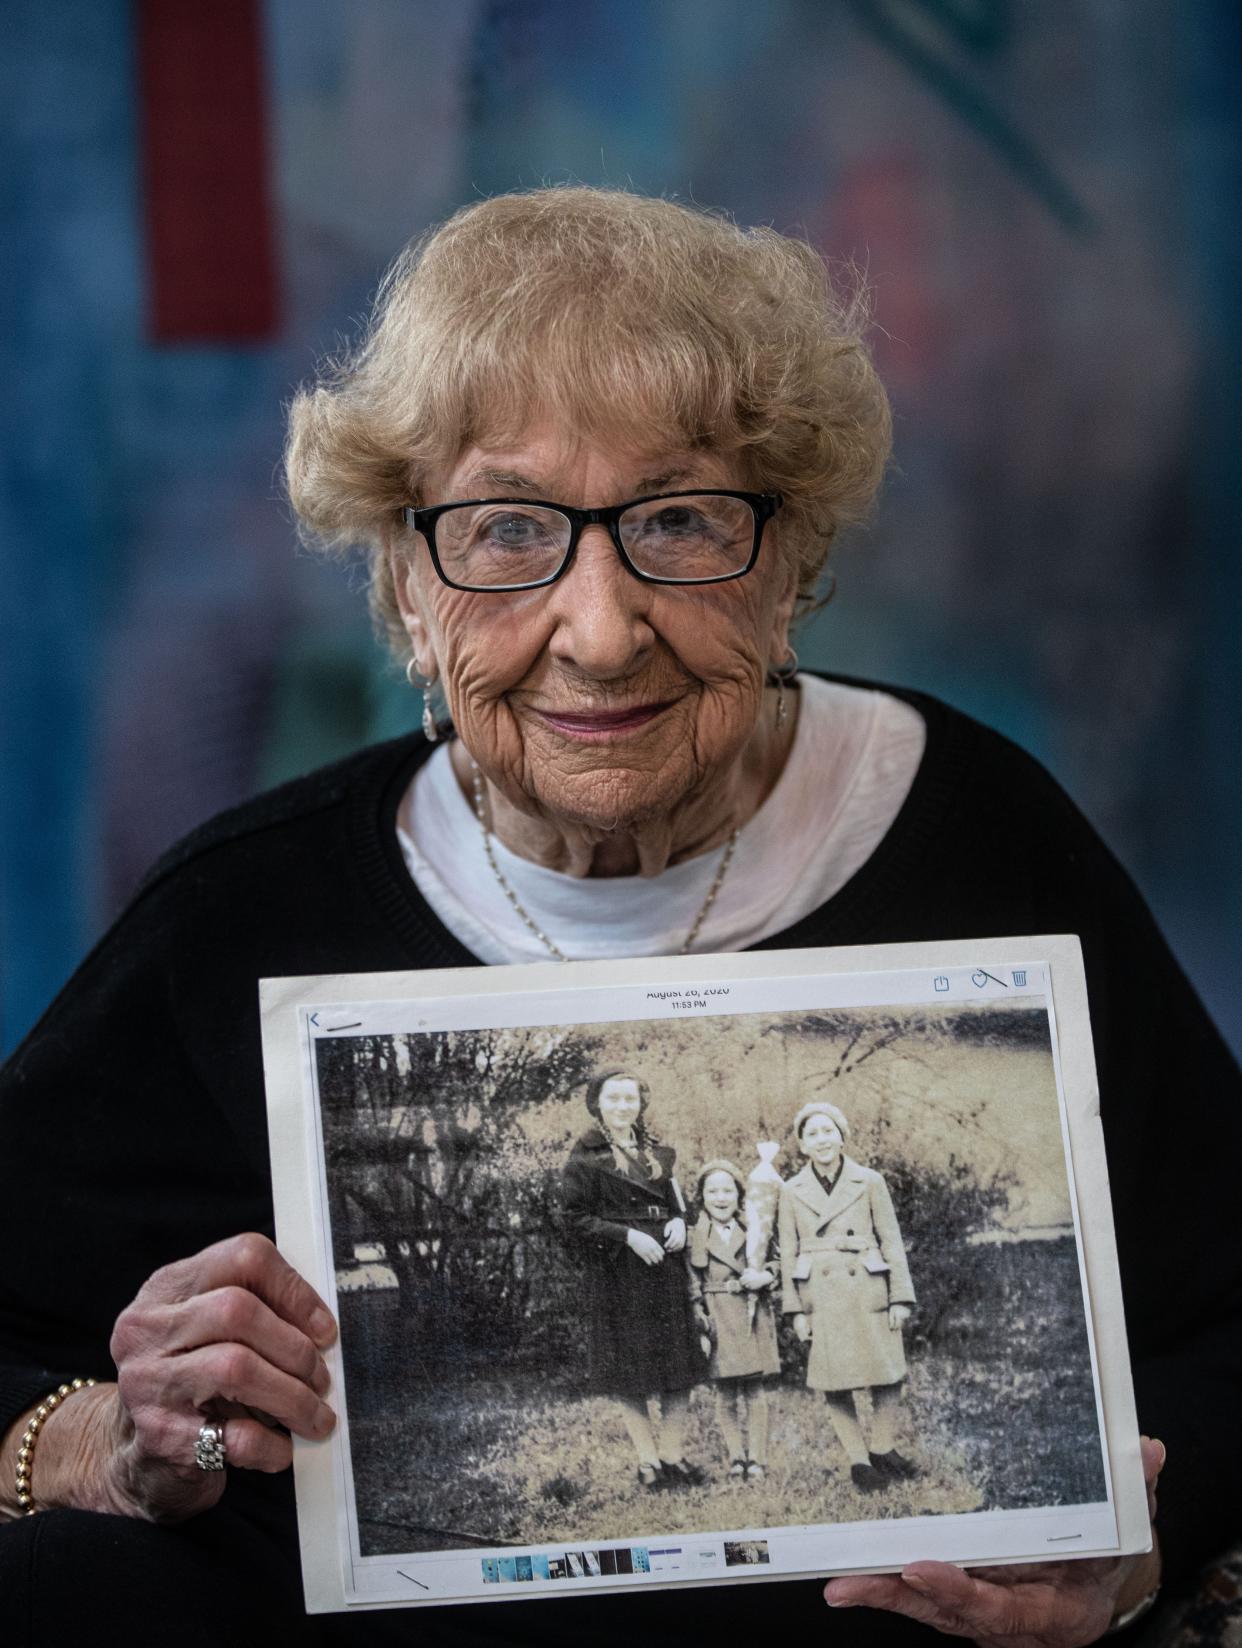 Hanne Holsten witnessed Kirstallnacht as a child in Gernany. Known as the ÒNight of Broken Glass" and taking place on Nov. 9 and 10, 1938, Kirstallnacht saw widespread pograms that destroyed Jewish businesses and led to the mass arrest and deportation of Jews to concentration camps. Holsten, now 93, and a resident of Hartsdale, sees parallels to what she witnessed as a child and the anti-semitism she sees today. She was photographed Nov. 9. 2023 with a photograph of her as a child with her two older siblings.